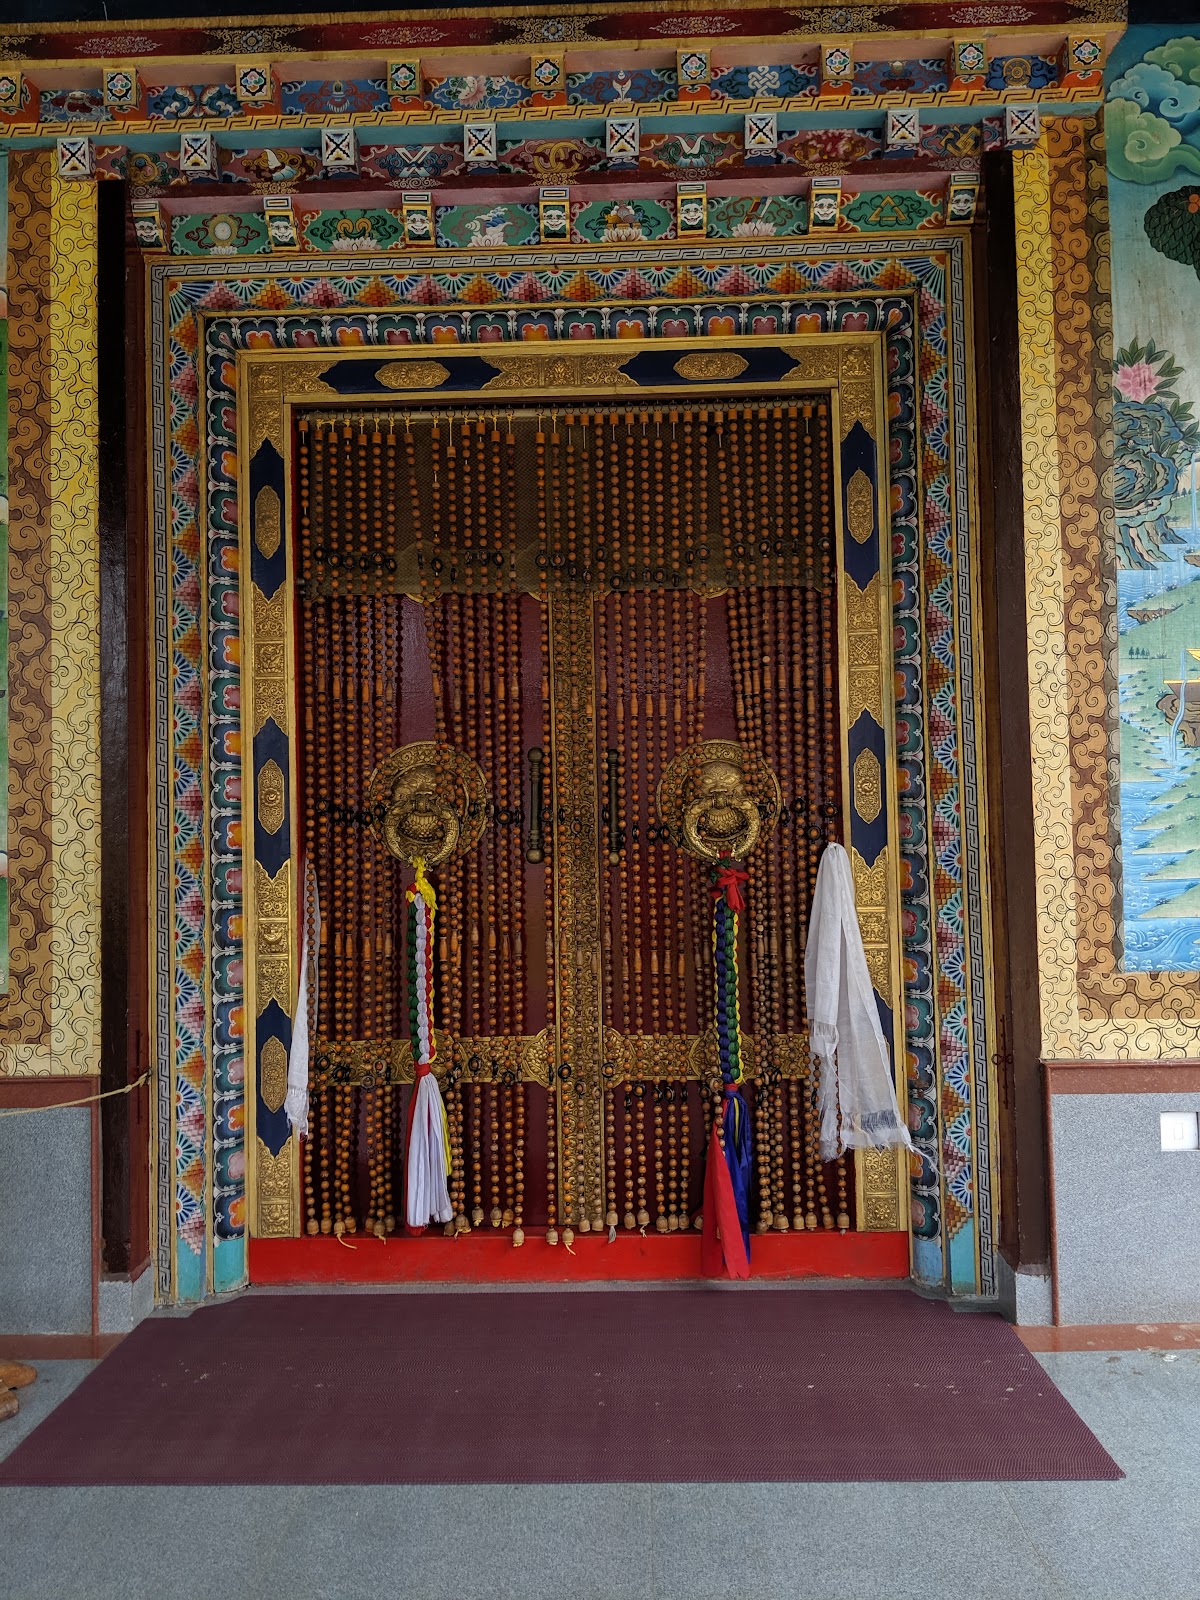 Namdring monastery images